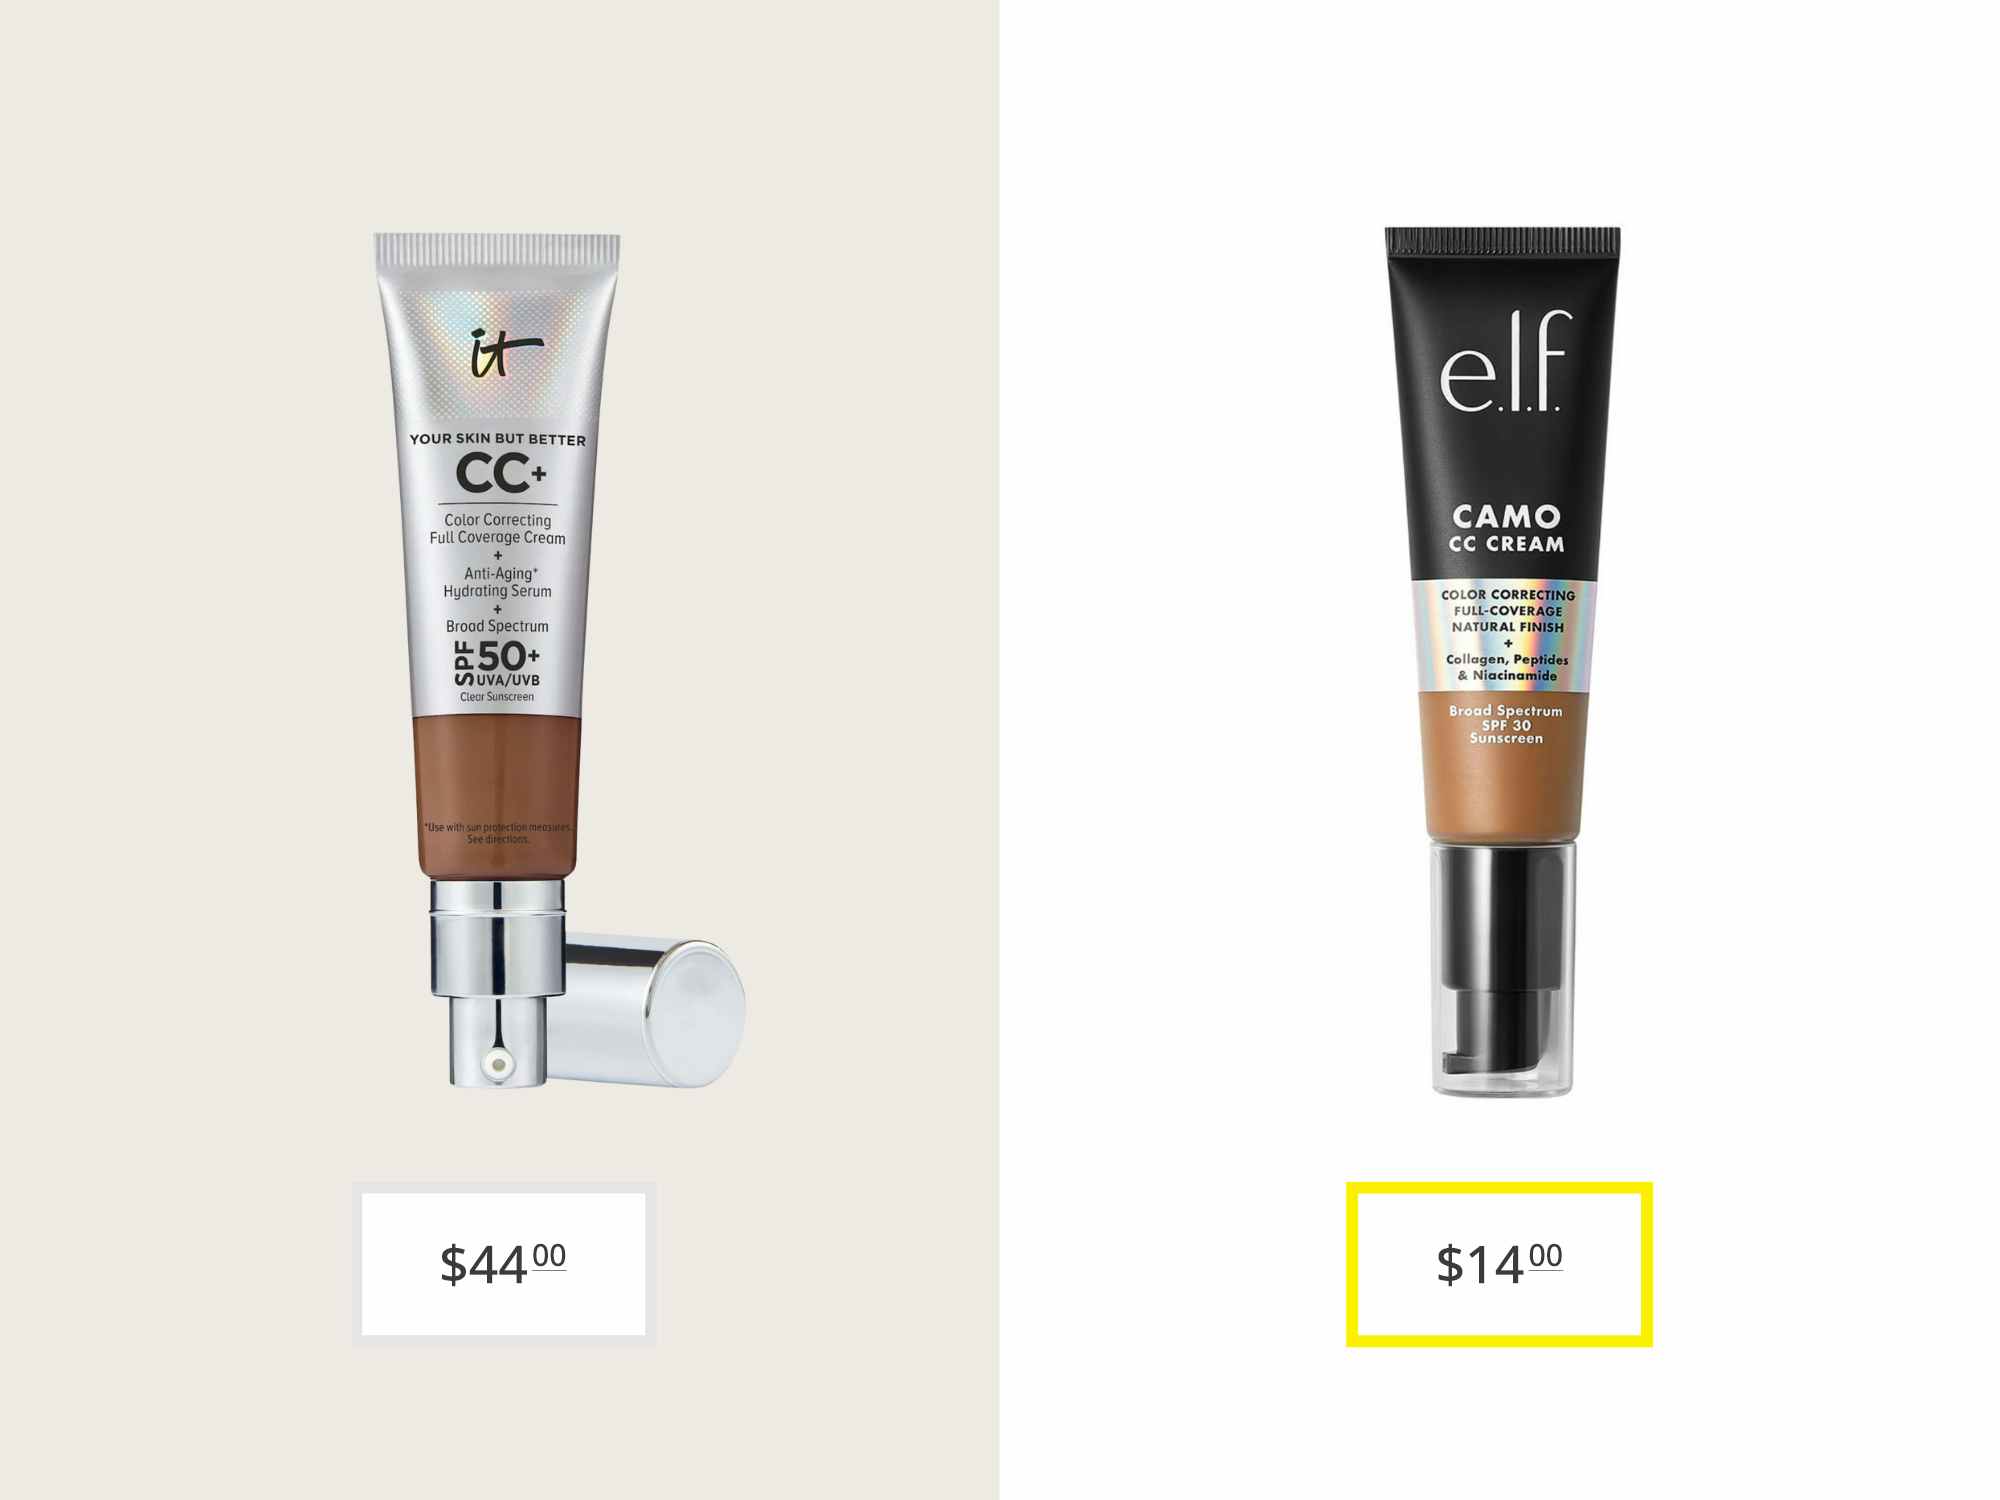 Spotted at Penneys: Two cruelty-free dupes for popular makeup brands -  HerFamily